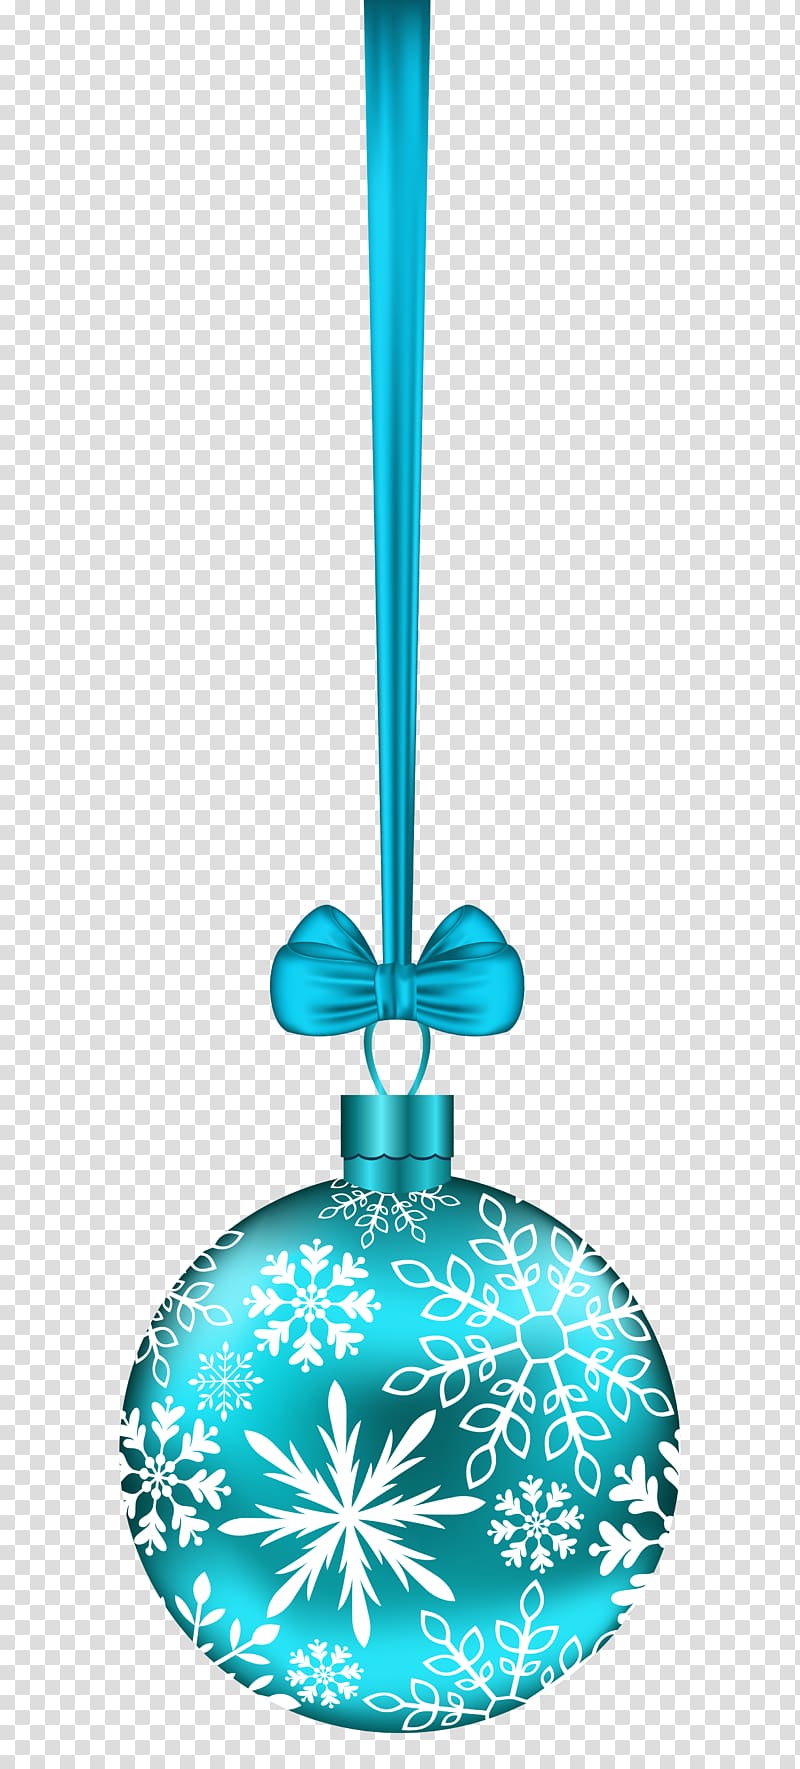 teal and white snowflake Christmas bauble, Christmas , Blue Christmas Ball transparent background PNG clipart